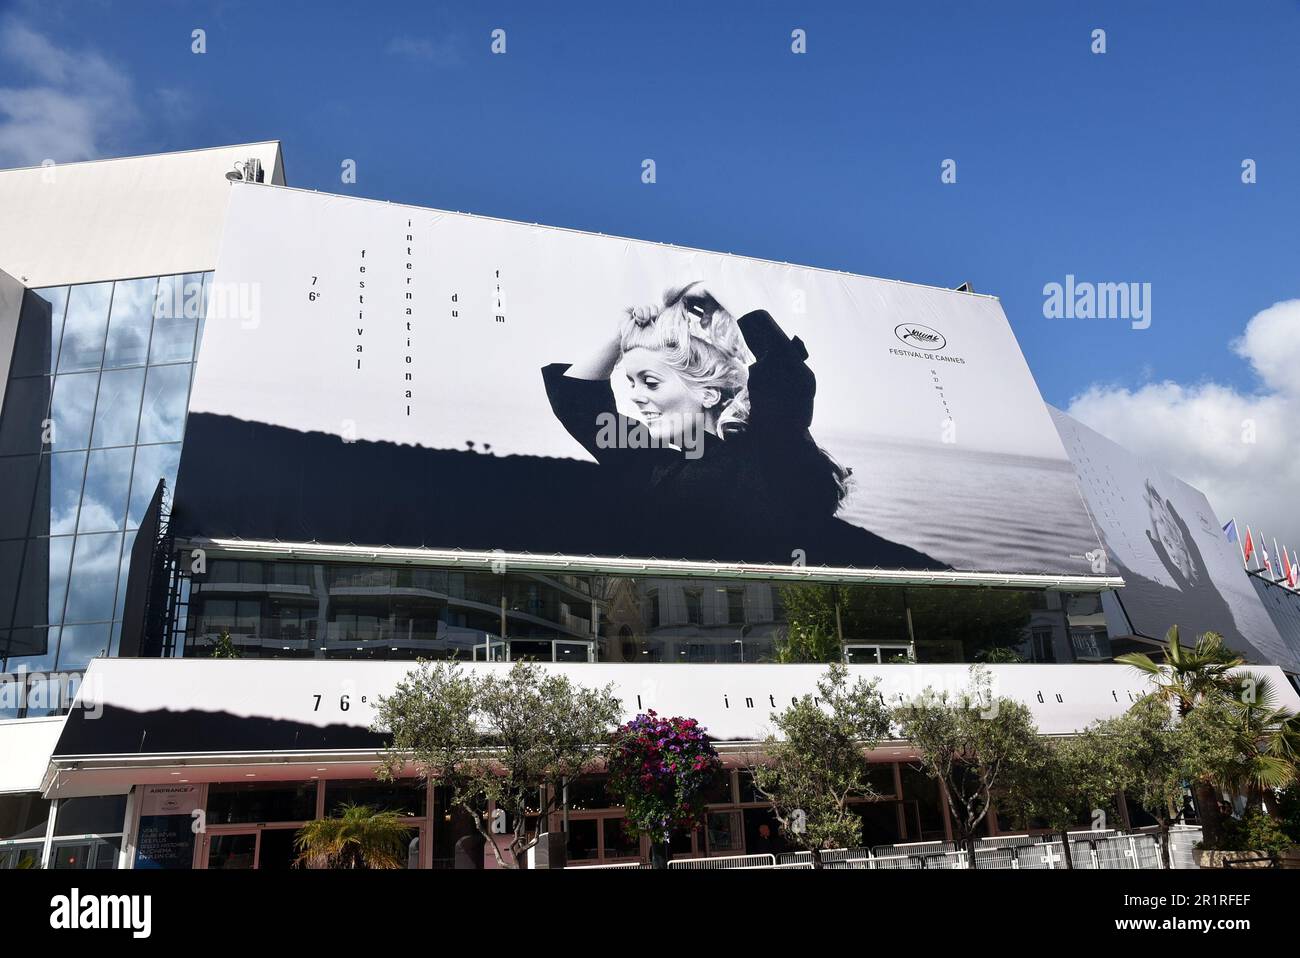 France, french riviera, Cannes, the official poster for the 76th International Film Festival, this year the french actress chosen is Catherine Deneuve. Stock Photo